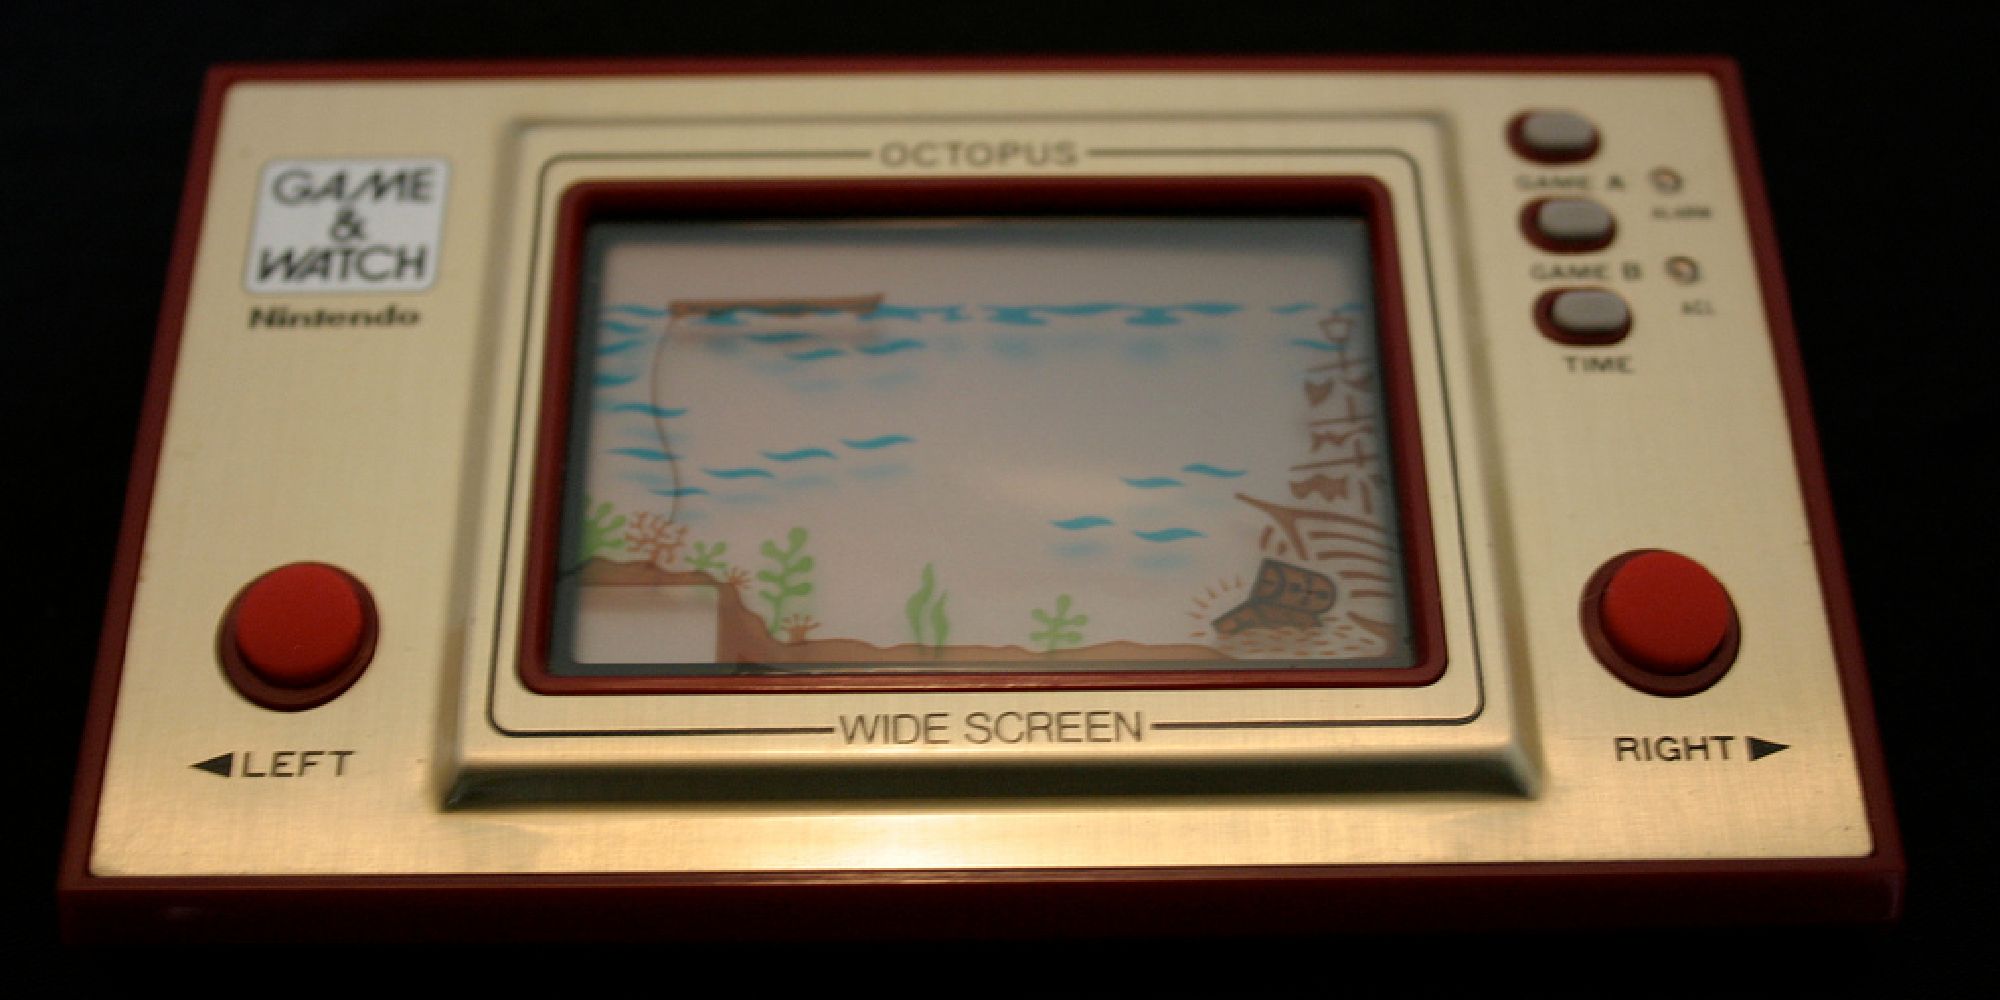 A Game & Watch "Octopus" system displaying a colorful screen